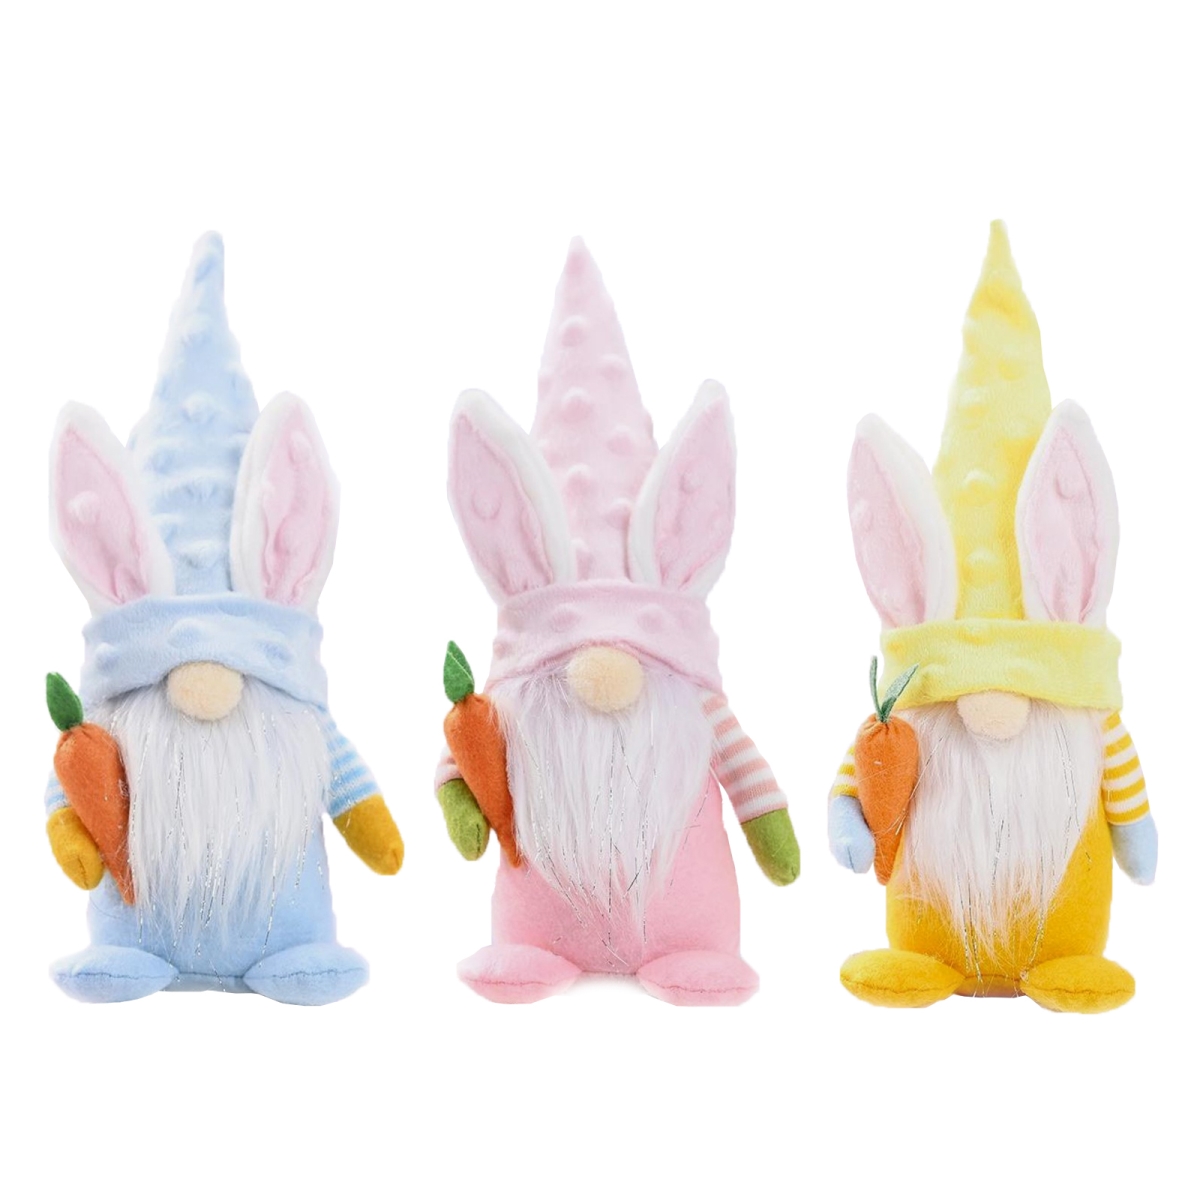 Picture of Santas Workshop 10104 10 in. Easter Gnomes with Carrot - Set of 3